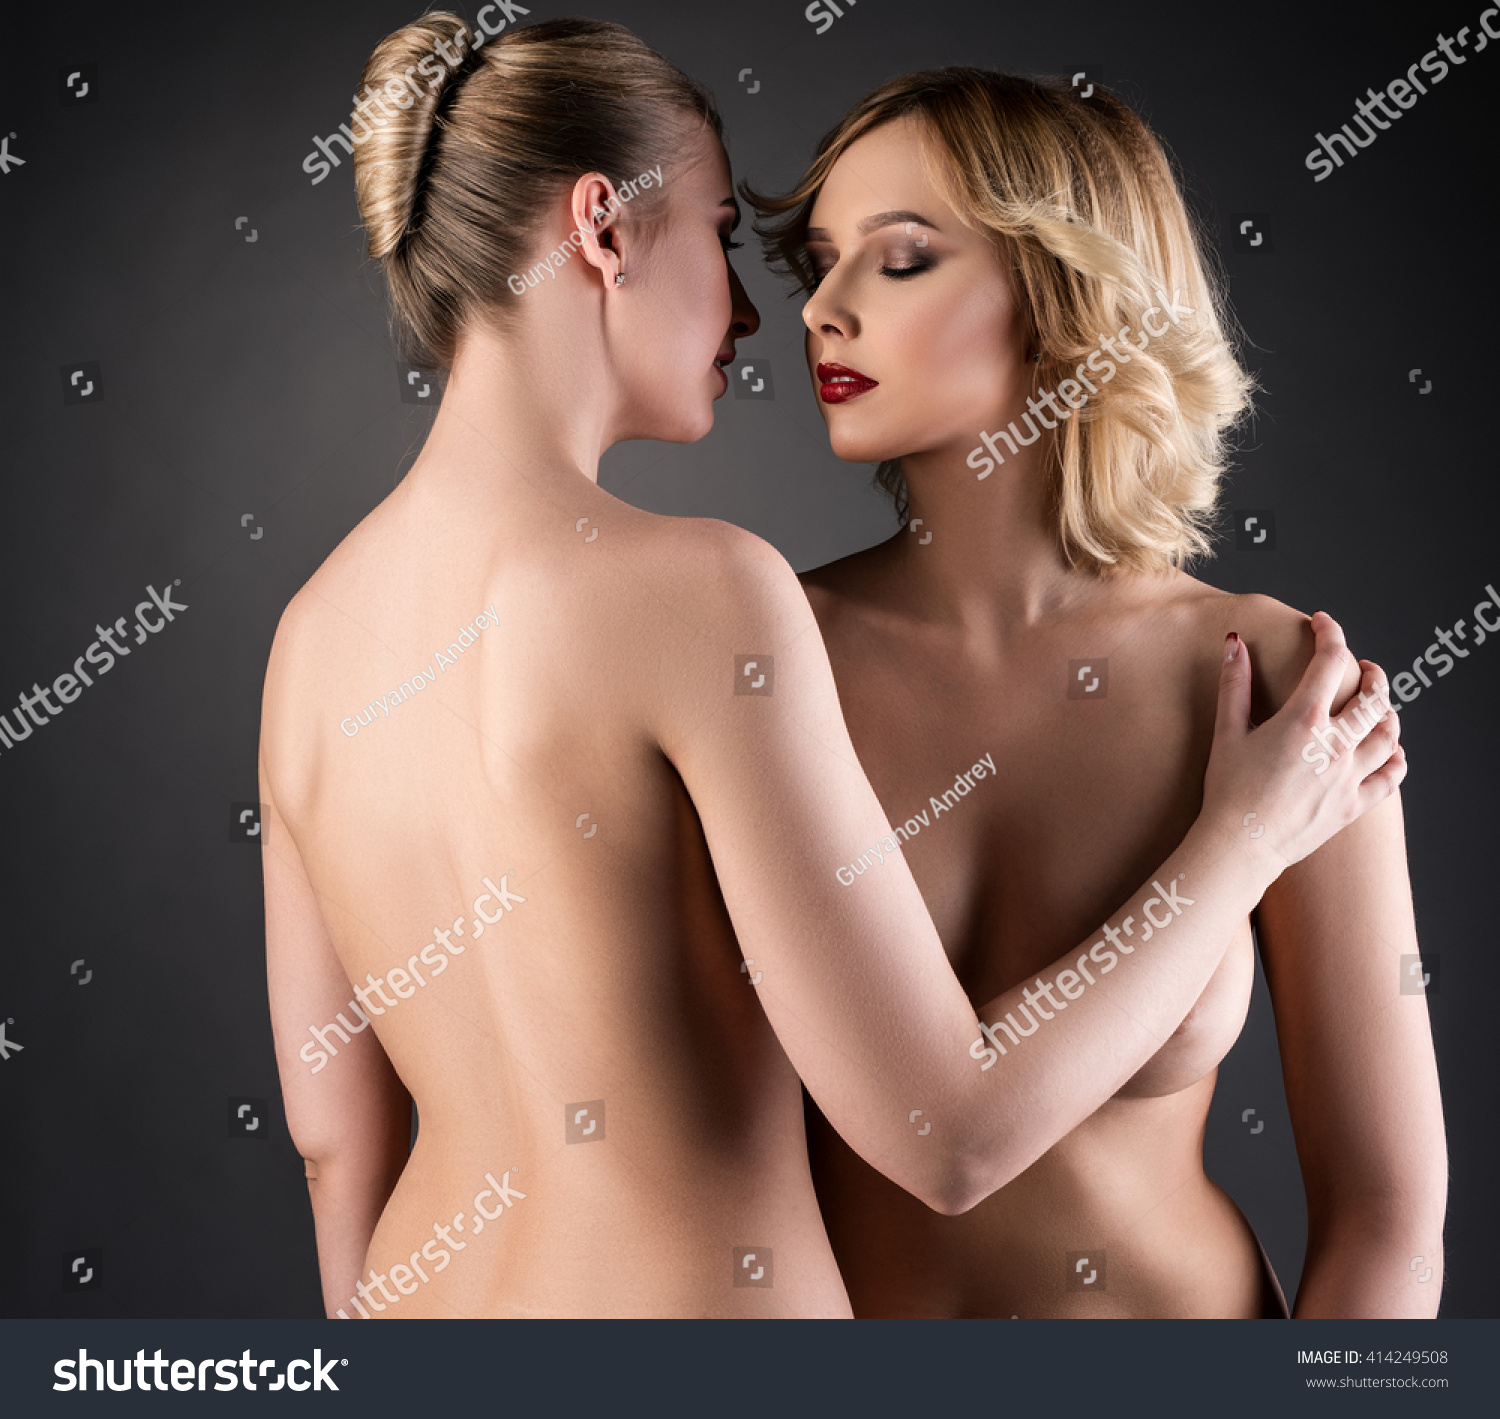 Women Getting Naked For The Camera